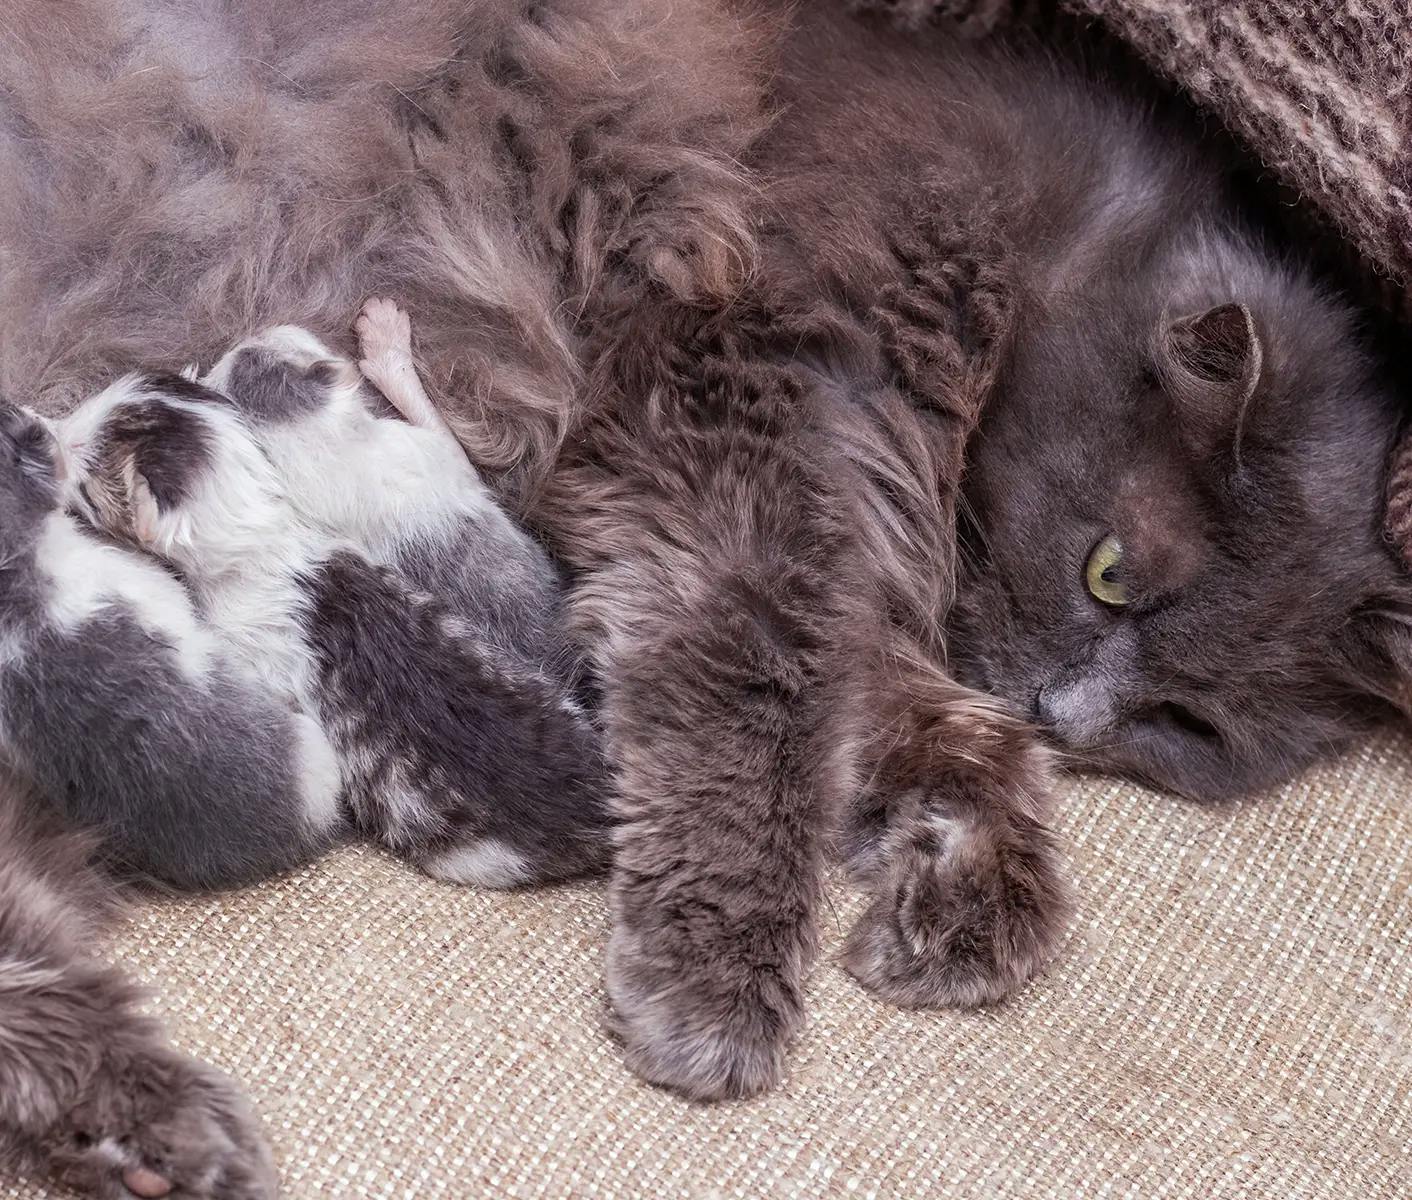 mom cat with her kittens